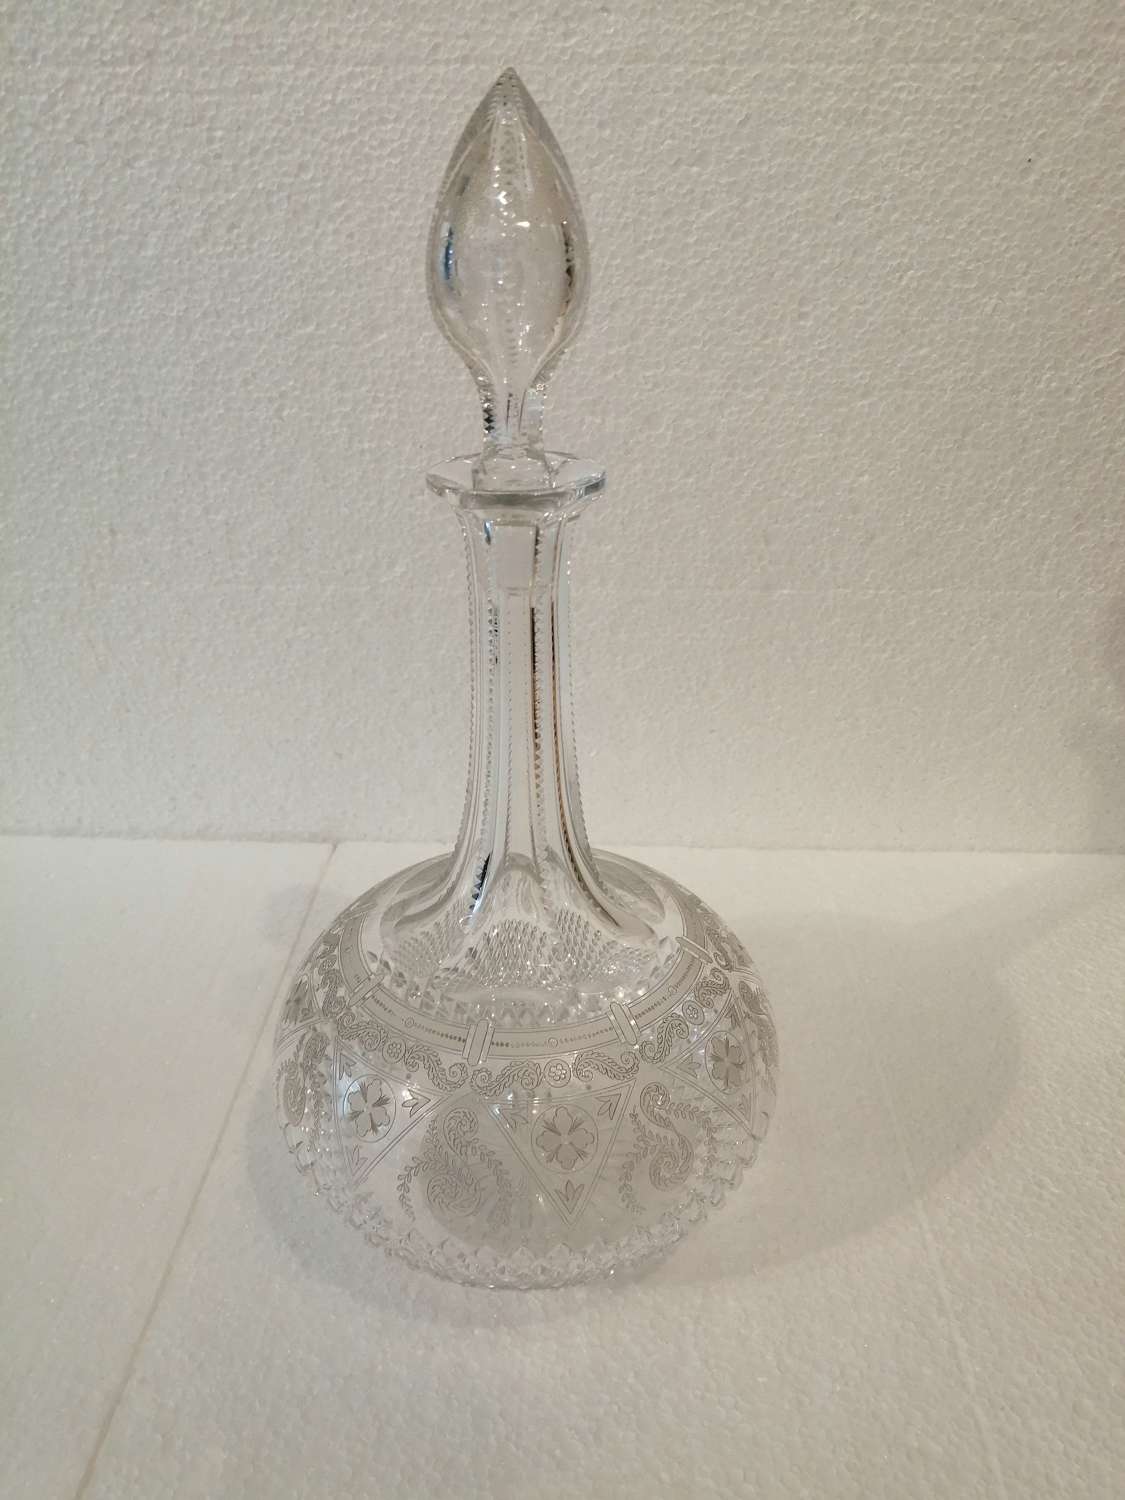 A beautiful F & C Osler engraved & ribbed cut glass decanter